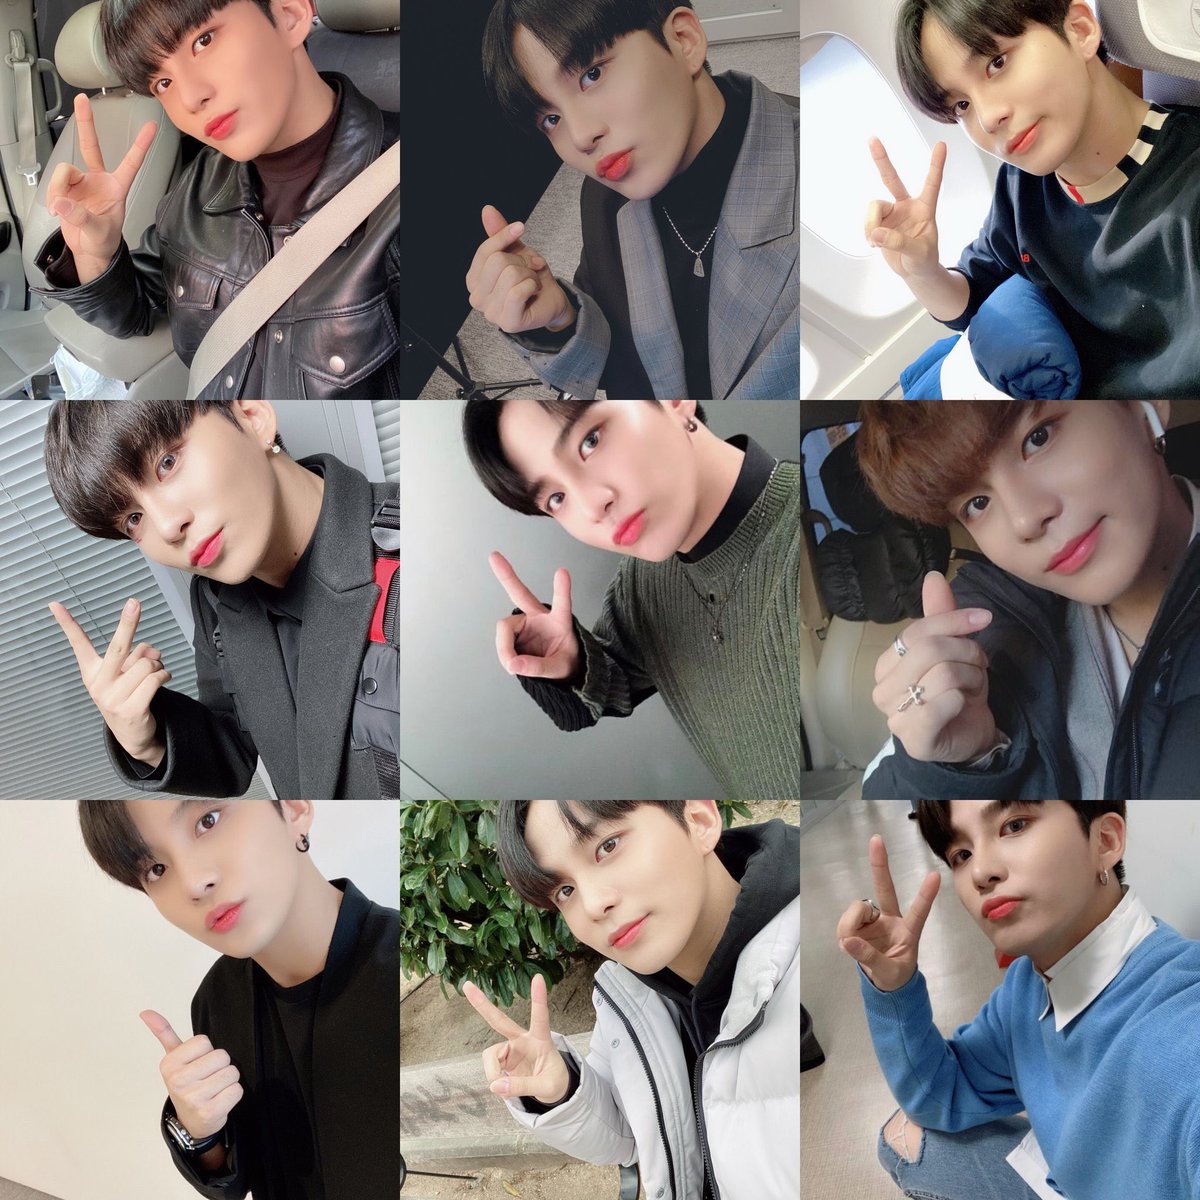 he always takes selcas the same way, consistent king. seriously how could you not adore this??